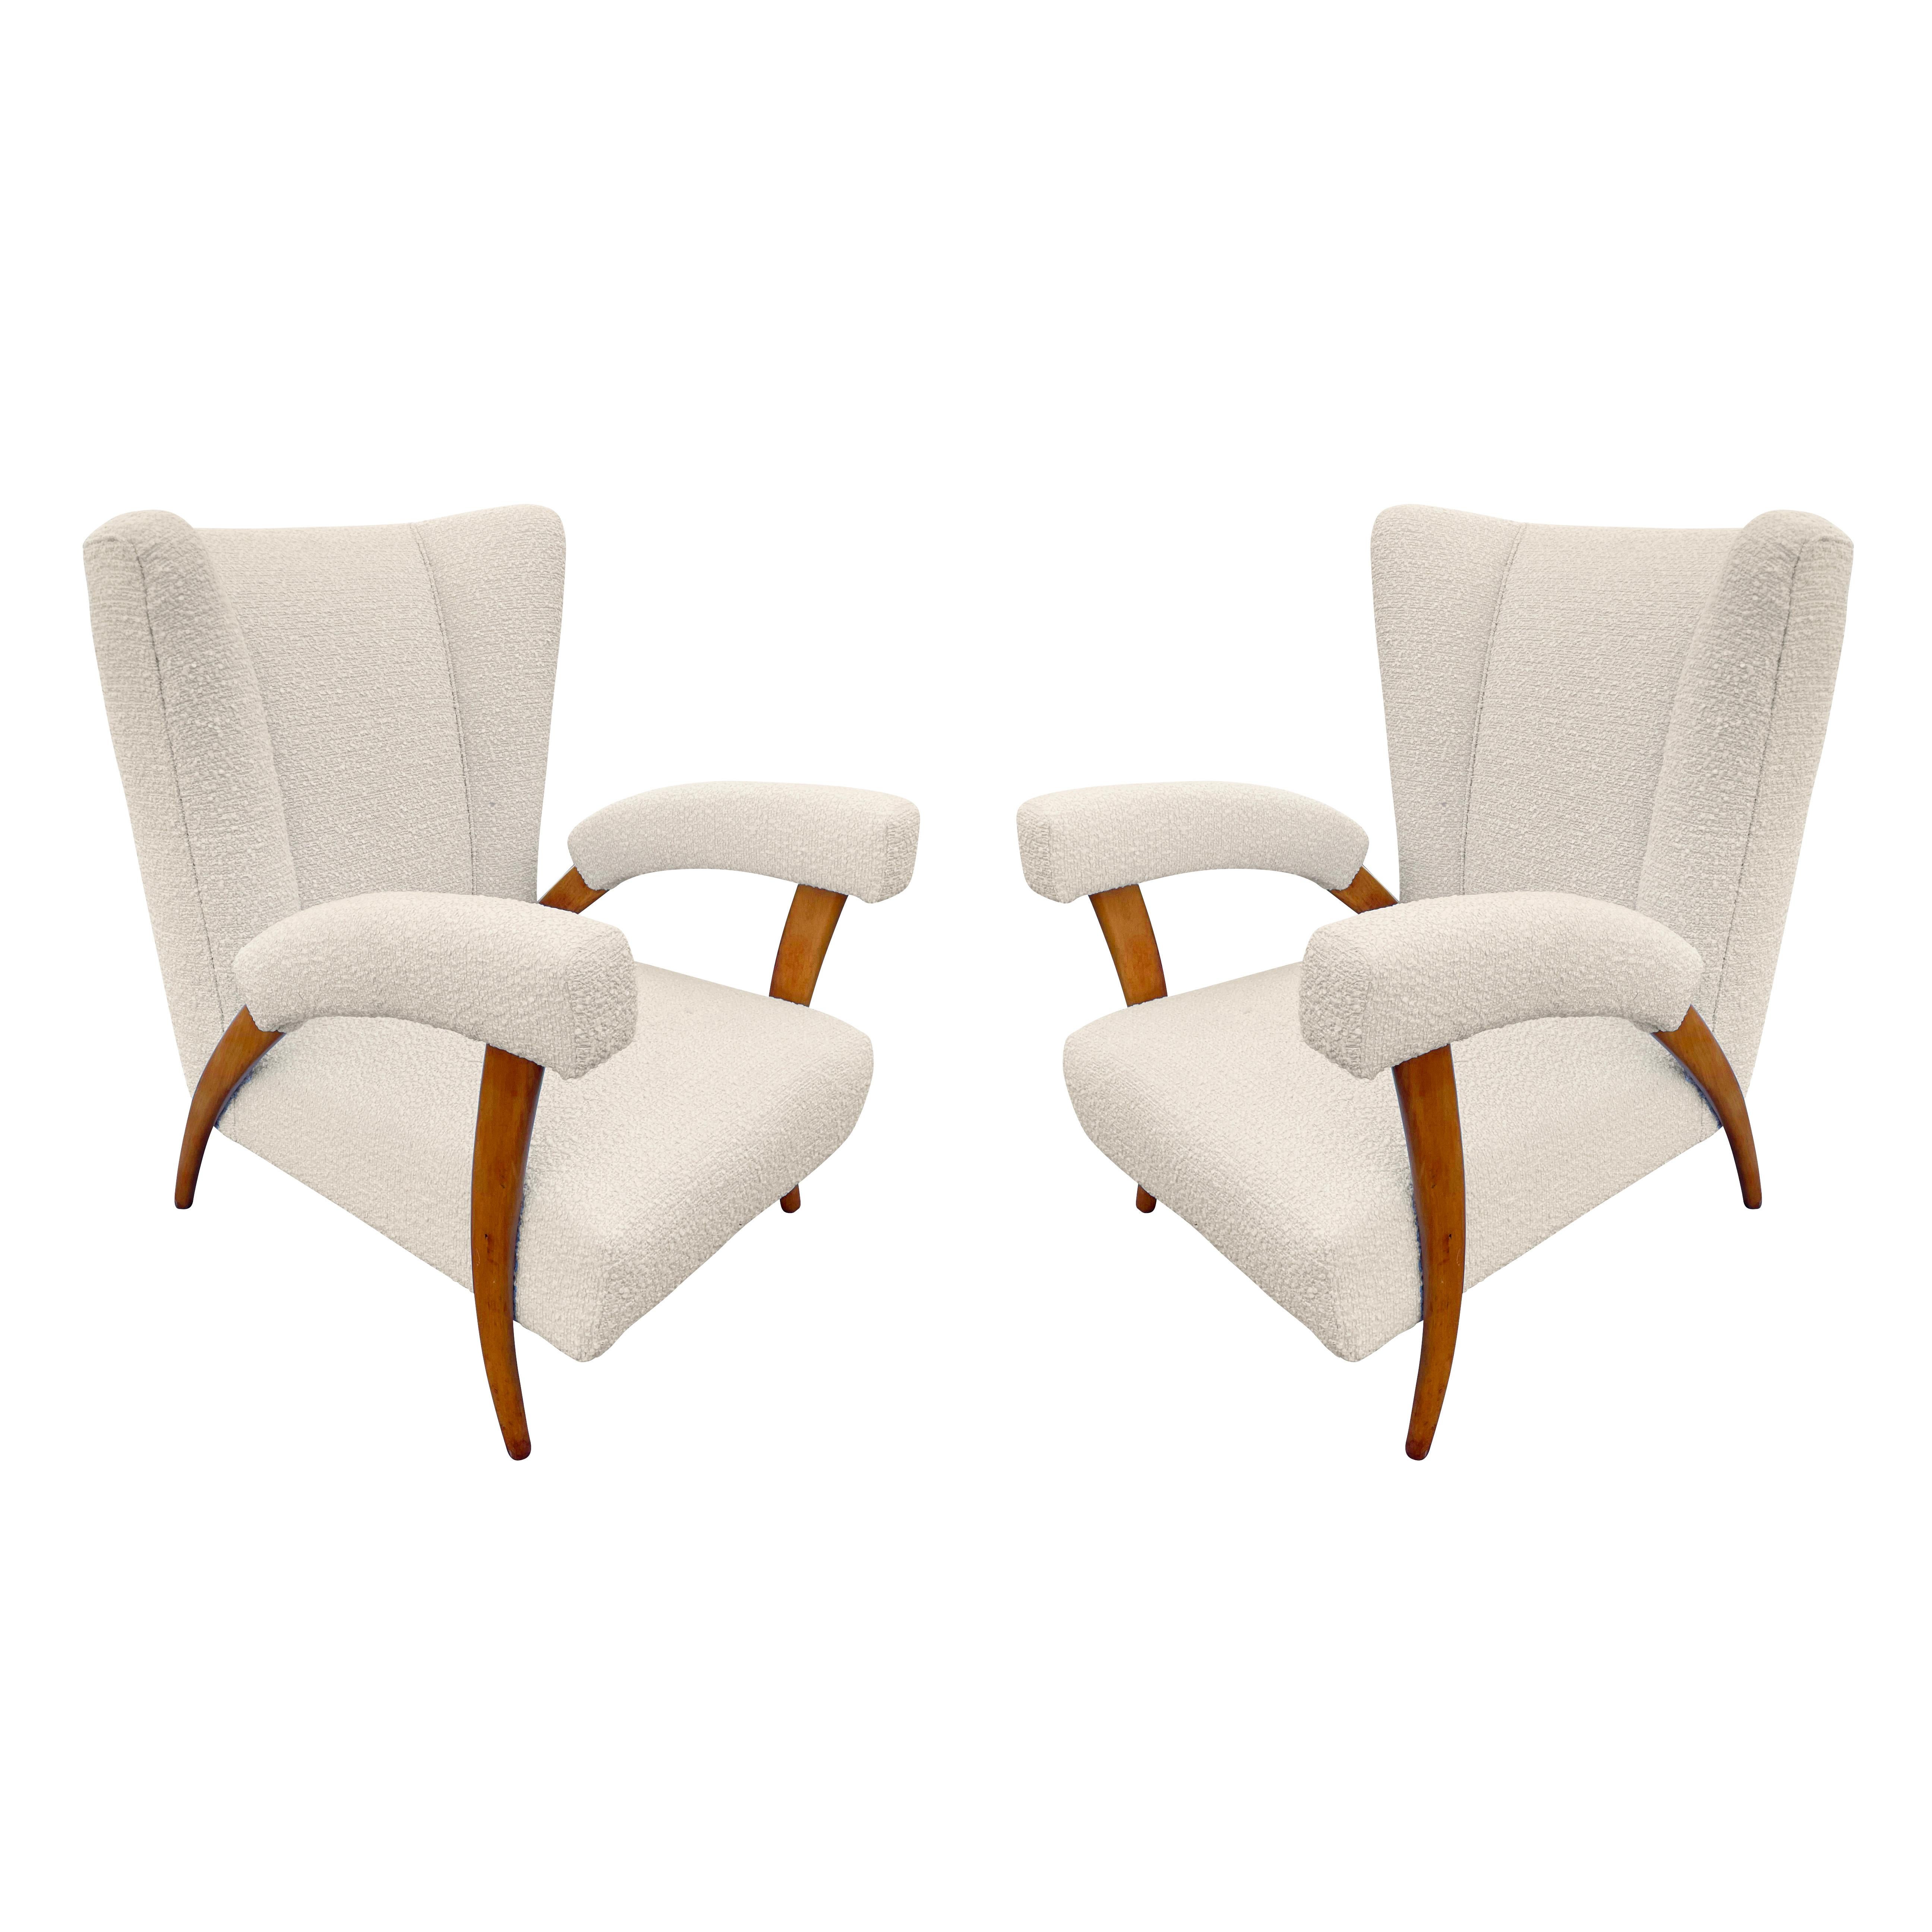 Mid-20th Century Pair of Armchairs attributed to Paolo Buffa, Italy, 1950s For Sale